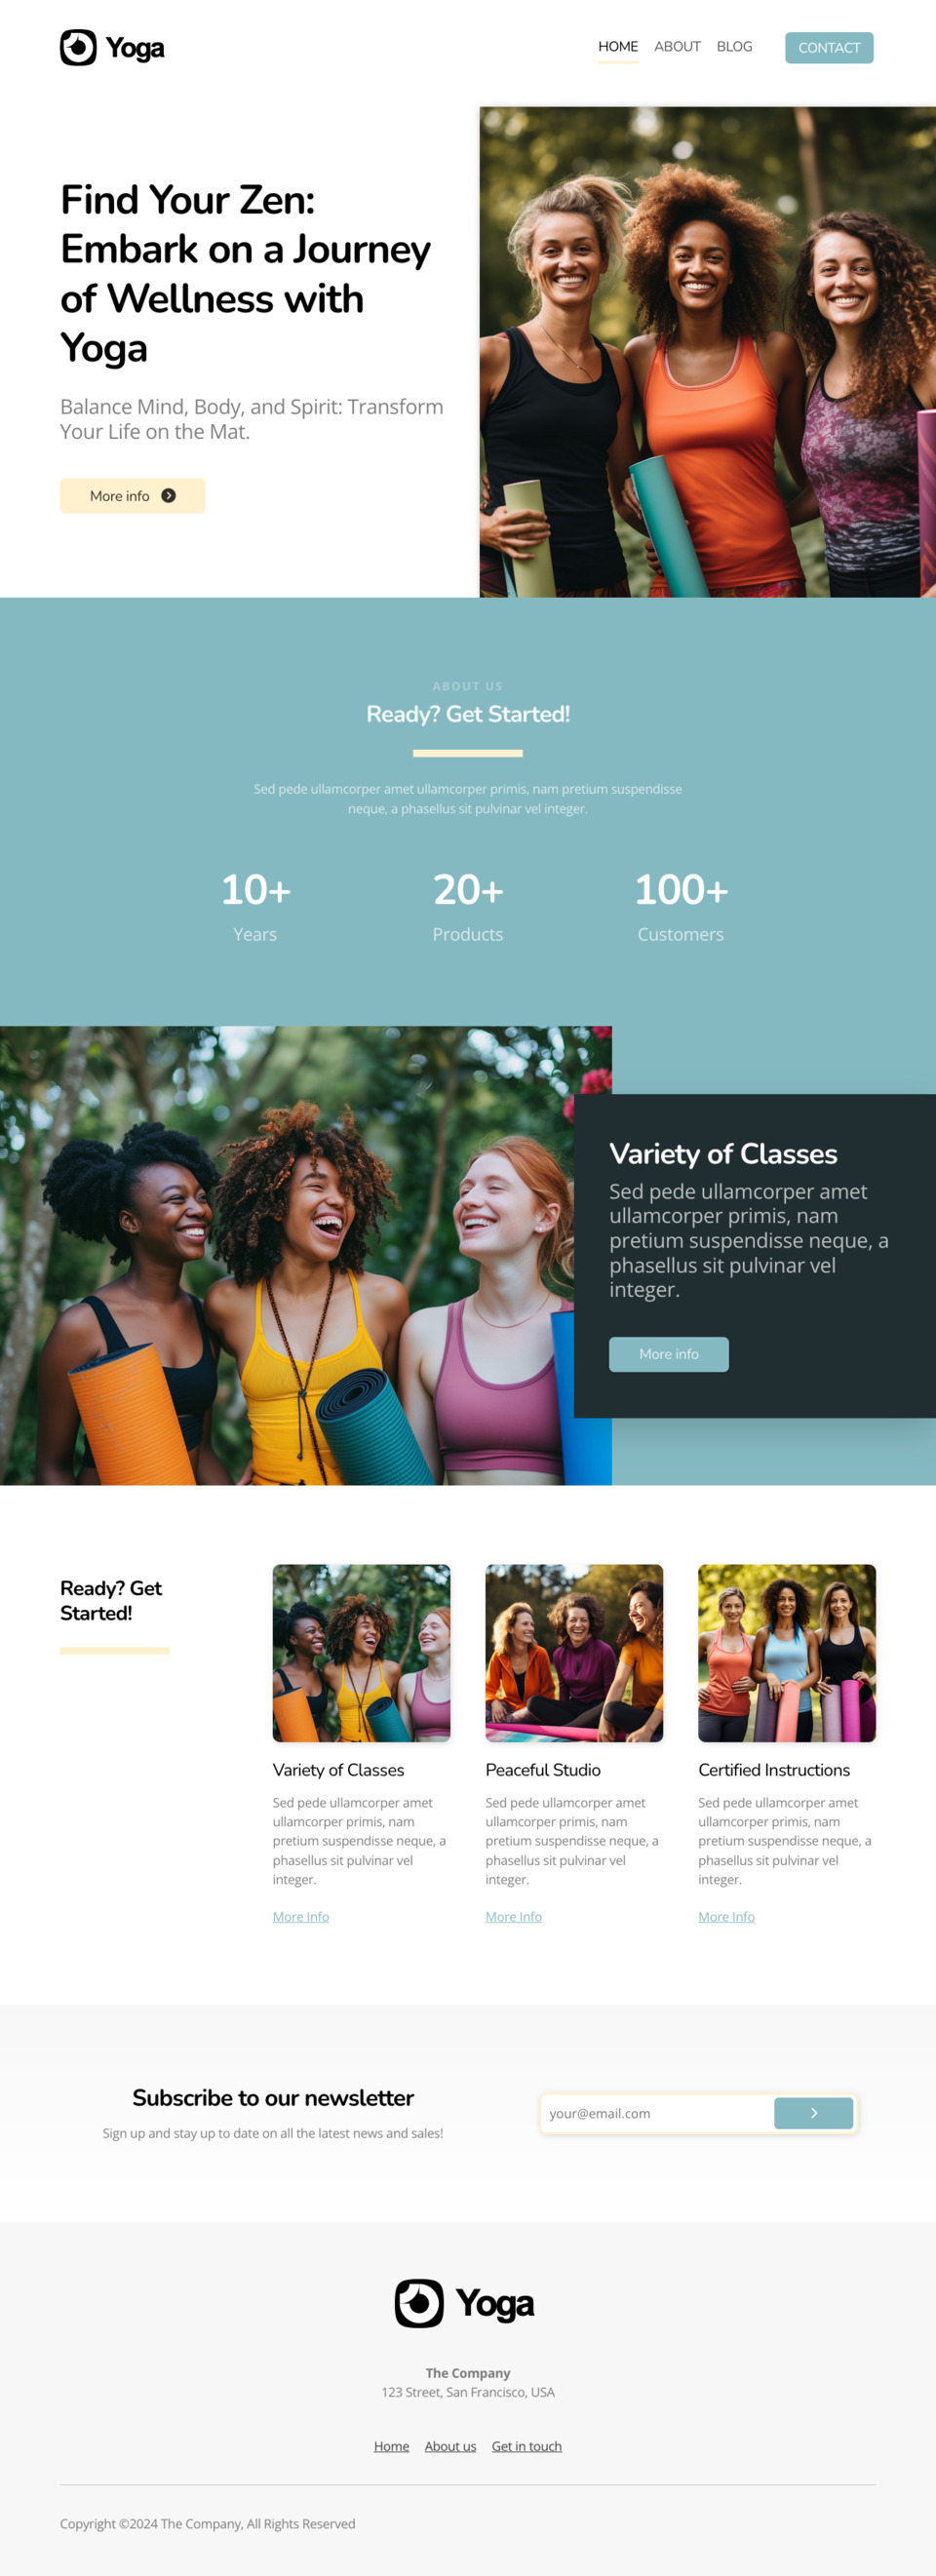 Yoga Website Template - Ideal for yoga classes, fitness centers, wellness blogs, personal trainers, and anyone in the health and wellness industry.